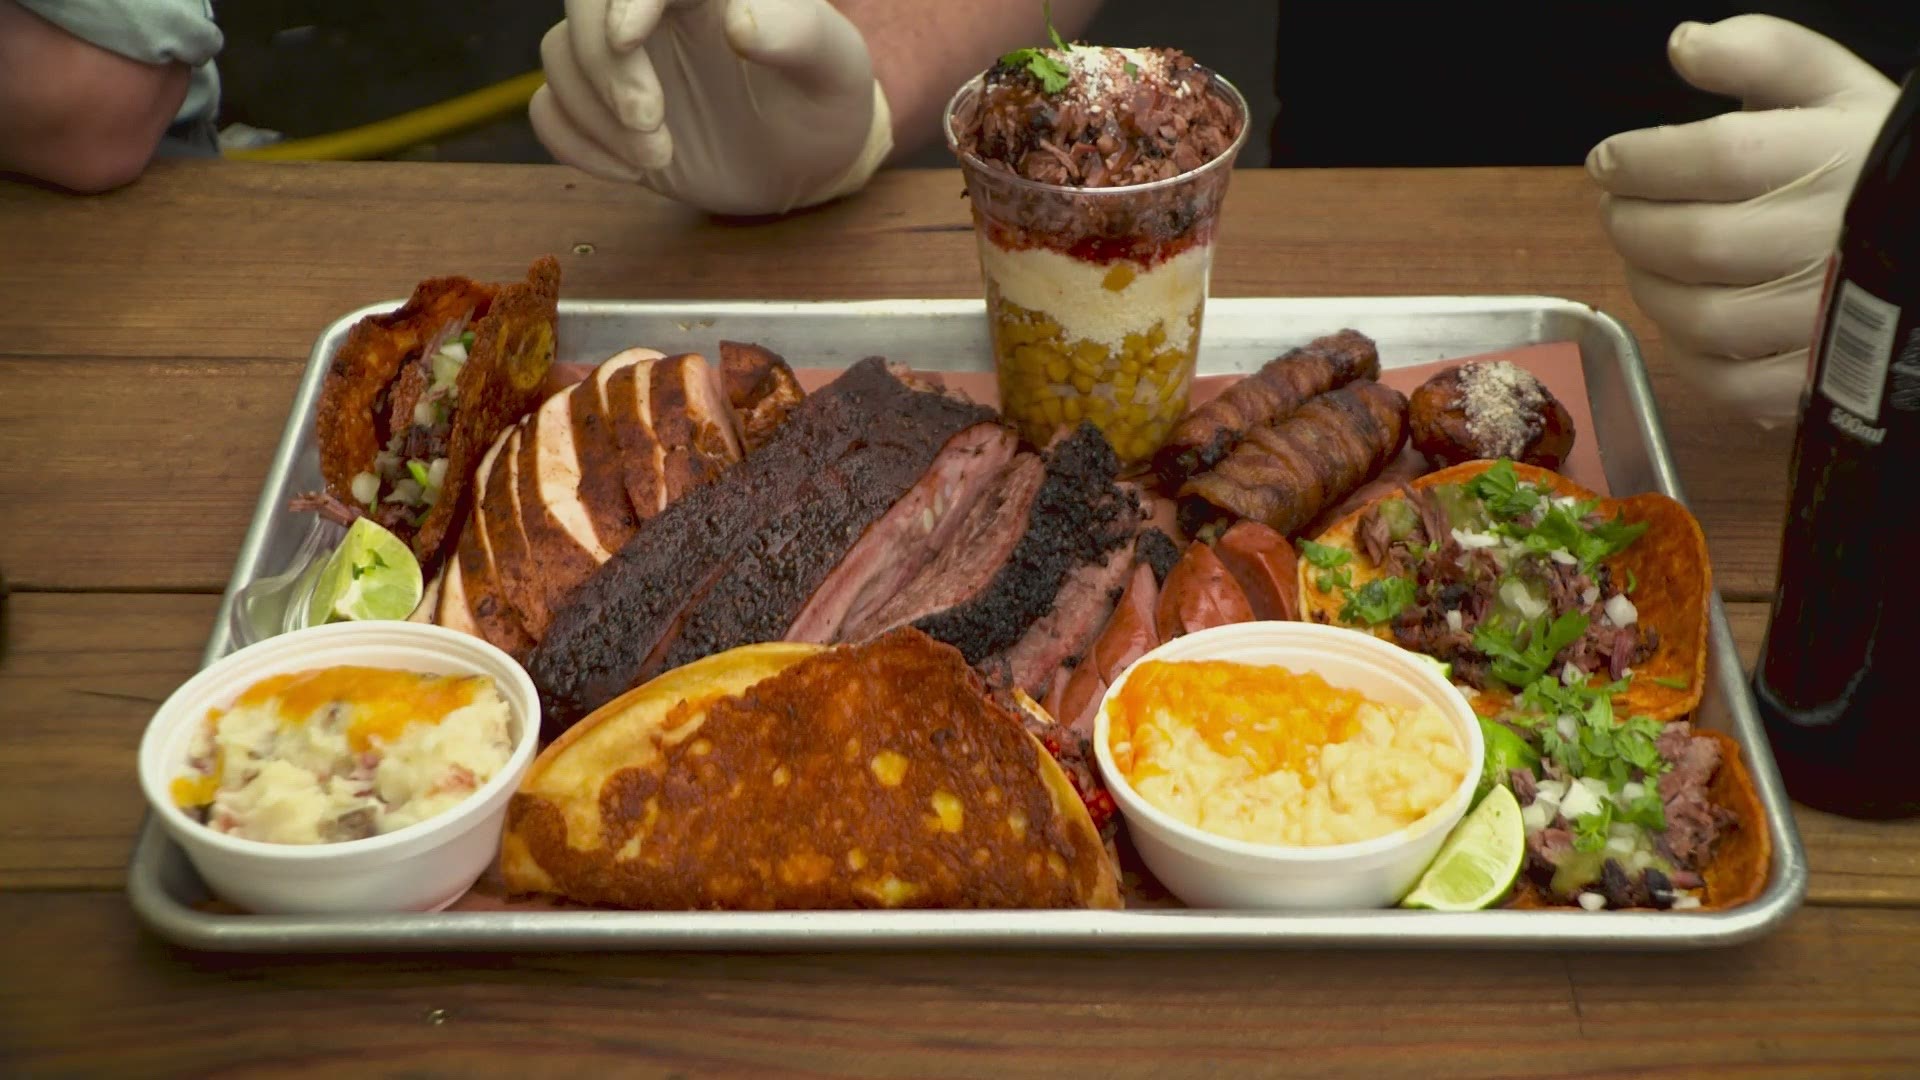 Of course, Texas is famous for brisket but 225 BBQ takes brisket to a whole other planet.